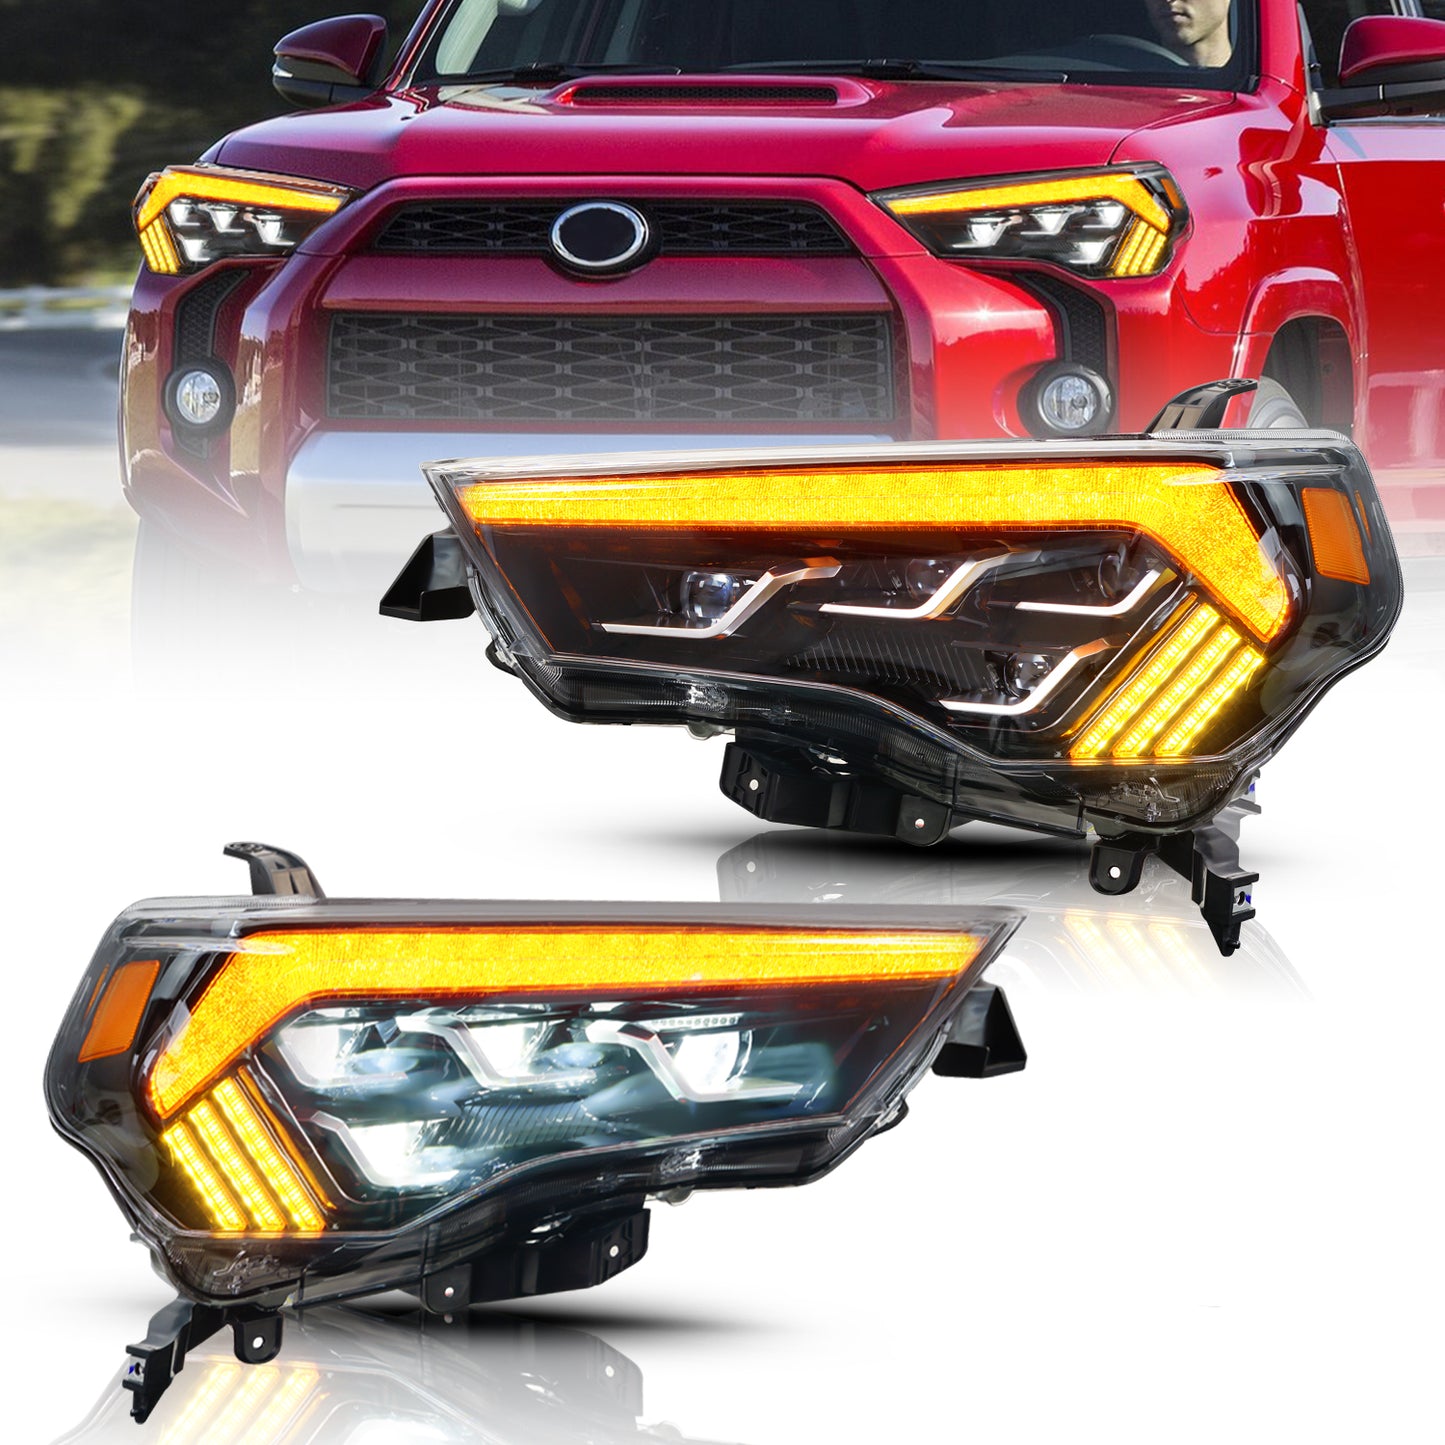 Full LED Headlights Assembly For Toyota 4Runner 2014-2020, One pair (4 PROJECTORS)